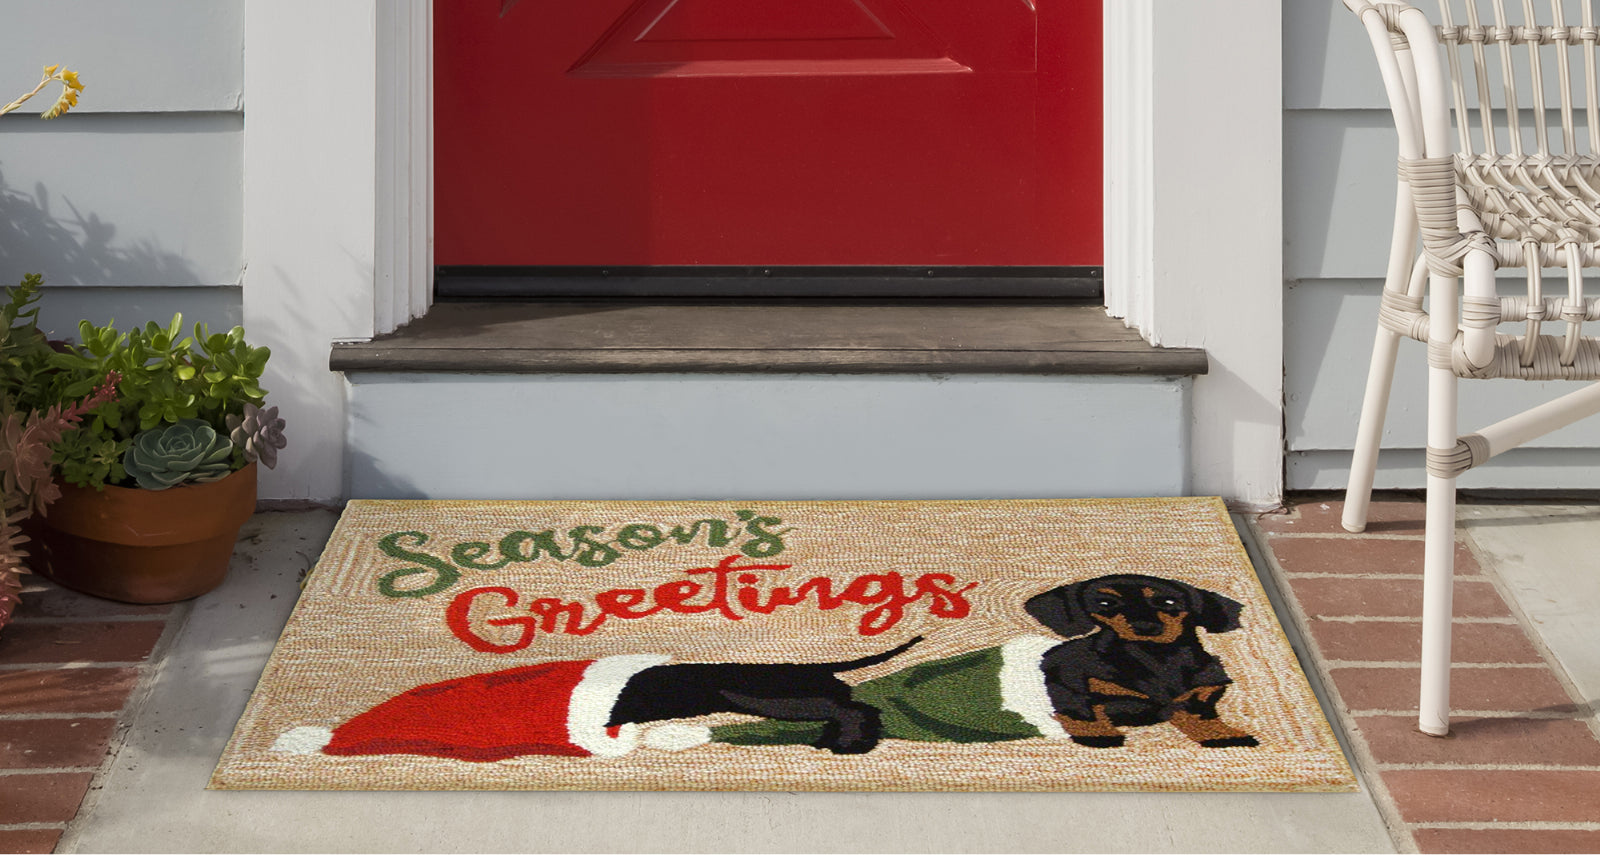 Trans Ocean Frontporch 4517/12 Dachsund Greetings Natural Area Rug by Liora Manne